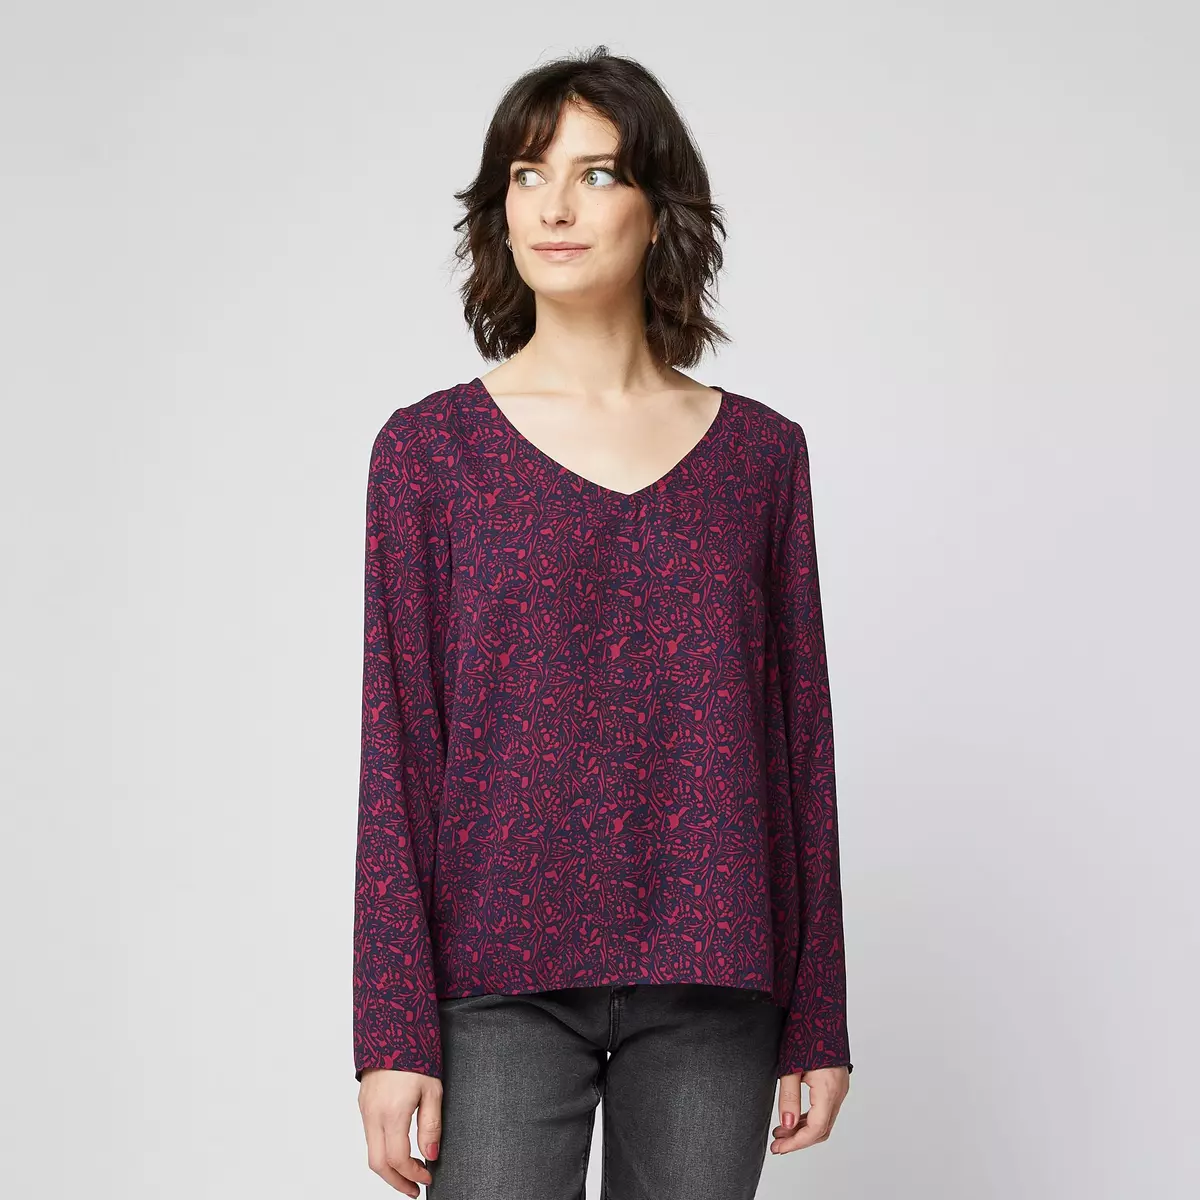 INEXTENSO Blouse manches longues femme